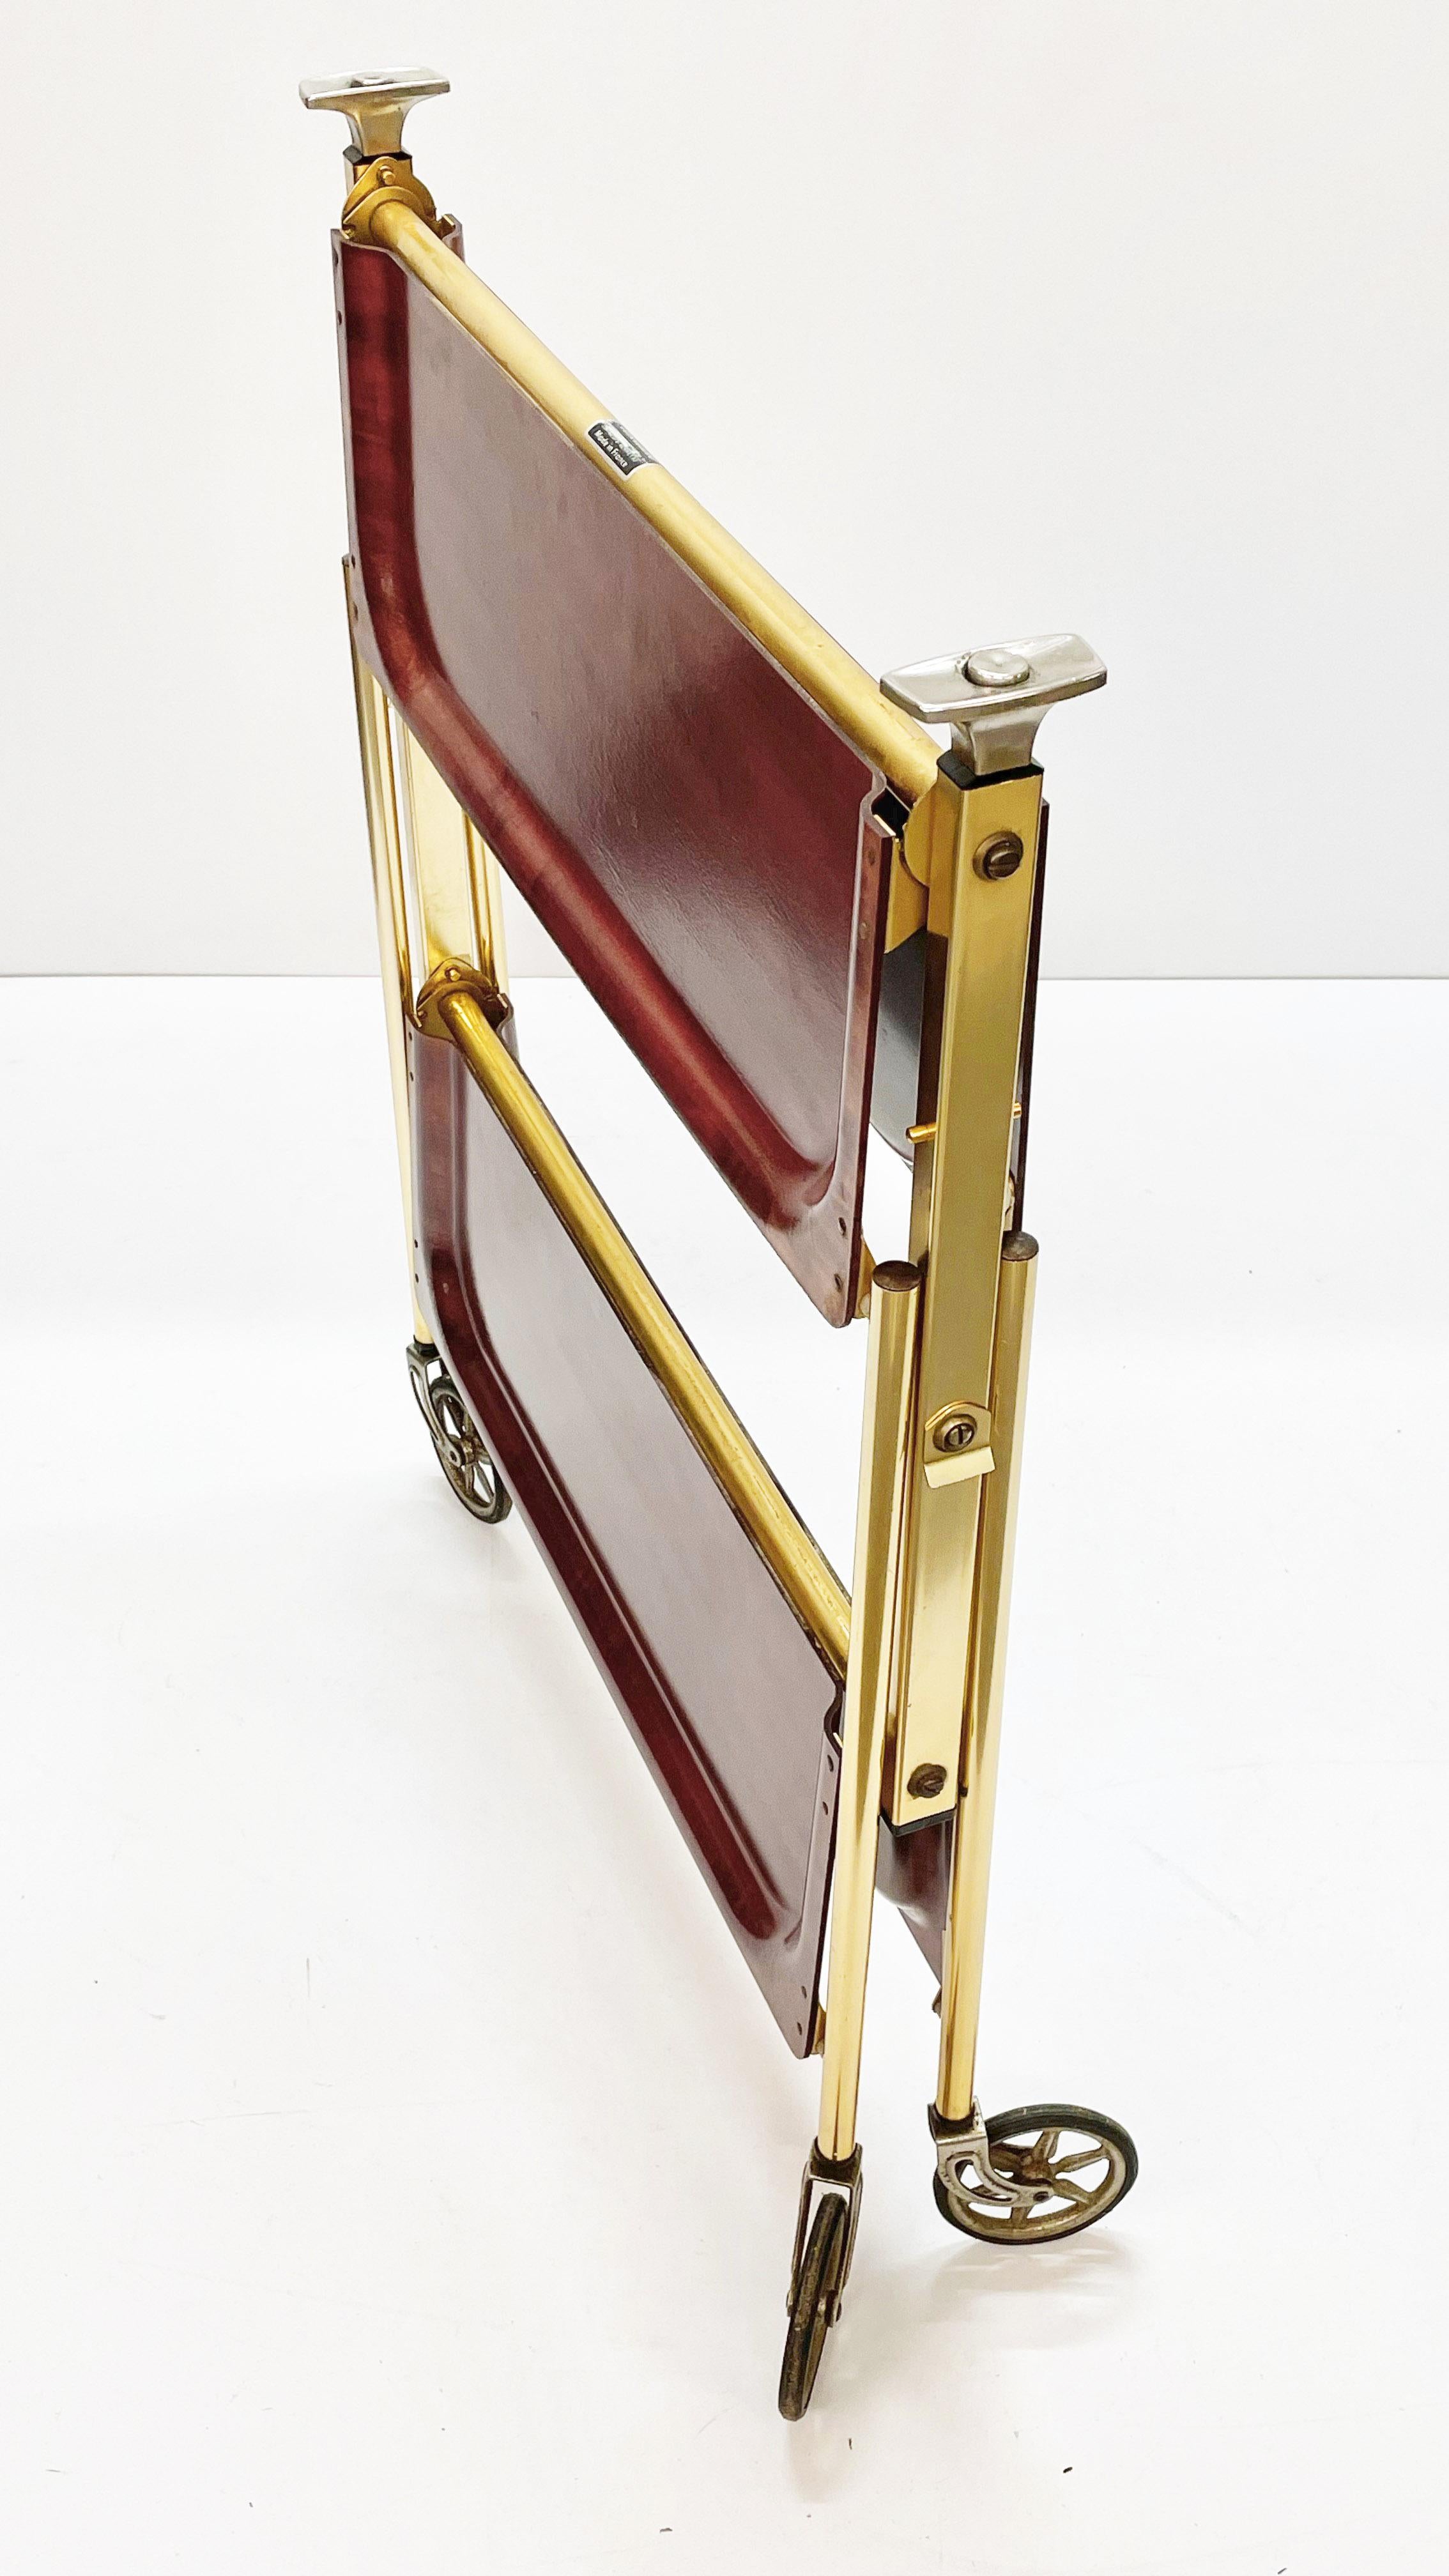 Textable Midcentury Foldable Trolley Wood and Golden Aluminium Bar Cart 1950 In Good Condition For Sale In Roma, IT